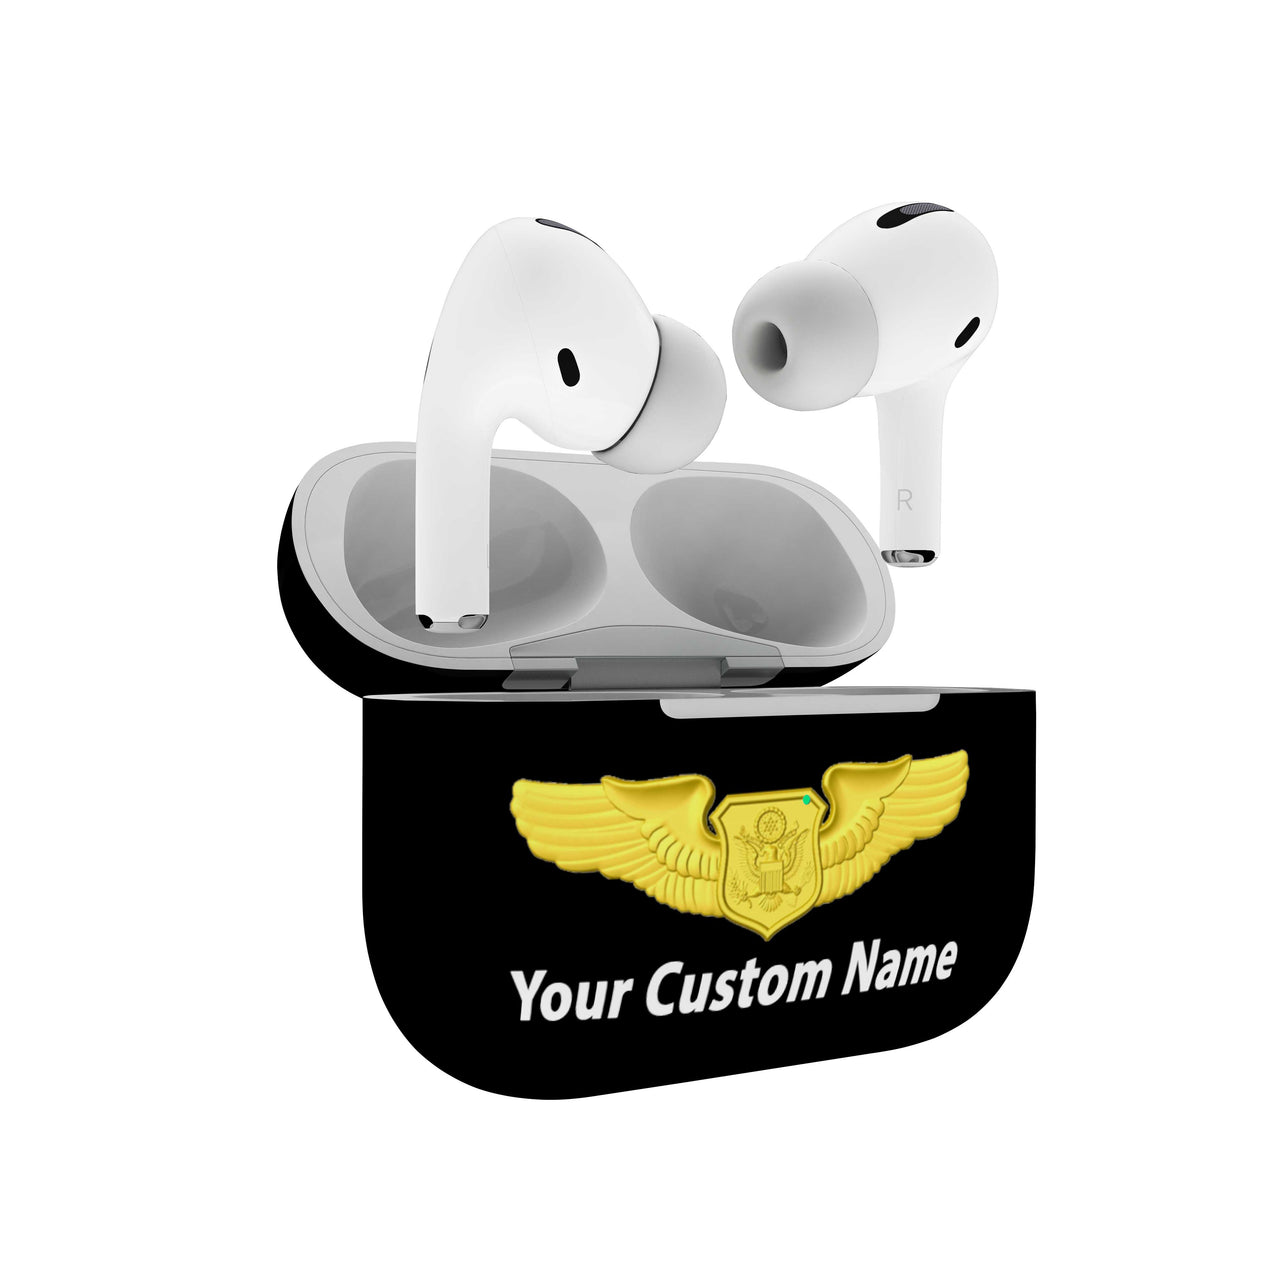 Custom Name (Special US Air Force) Designed Airpods "Pro" Cases